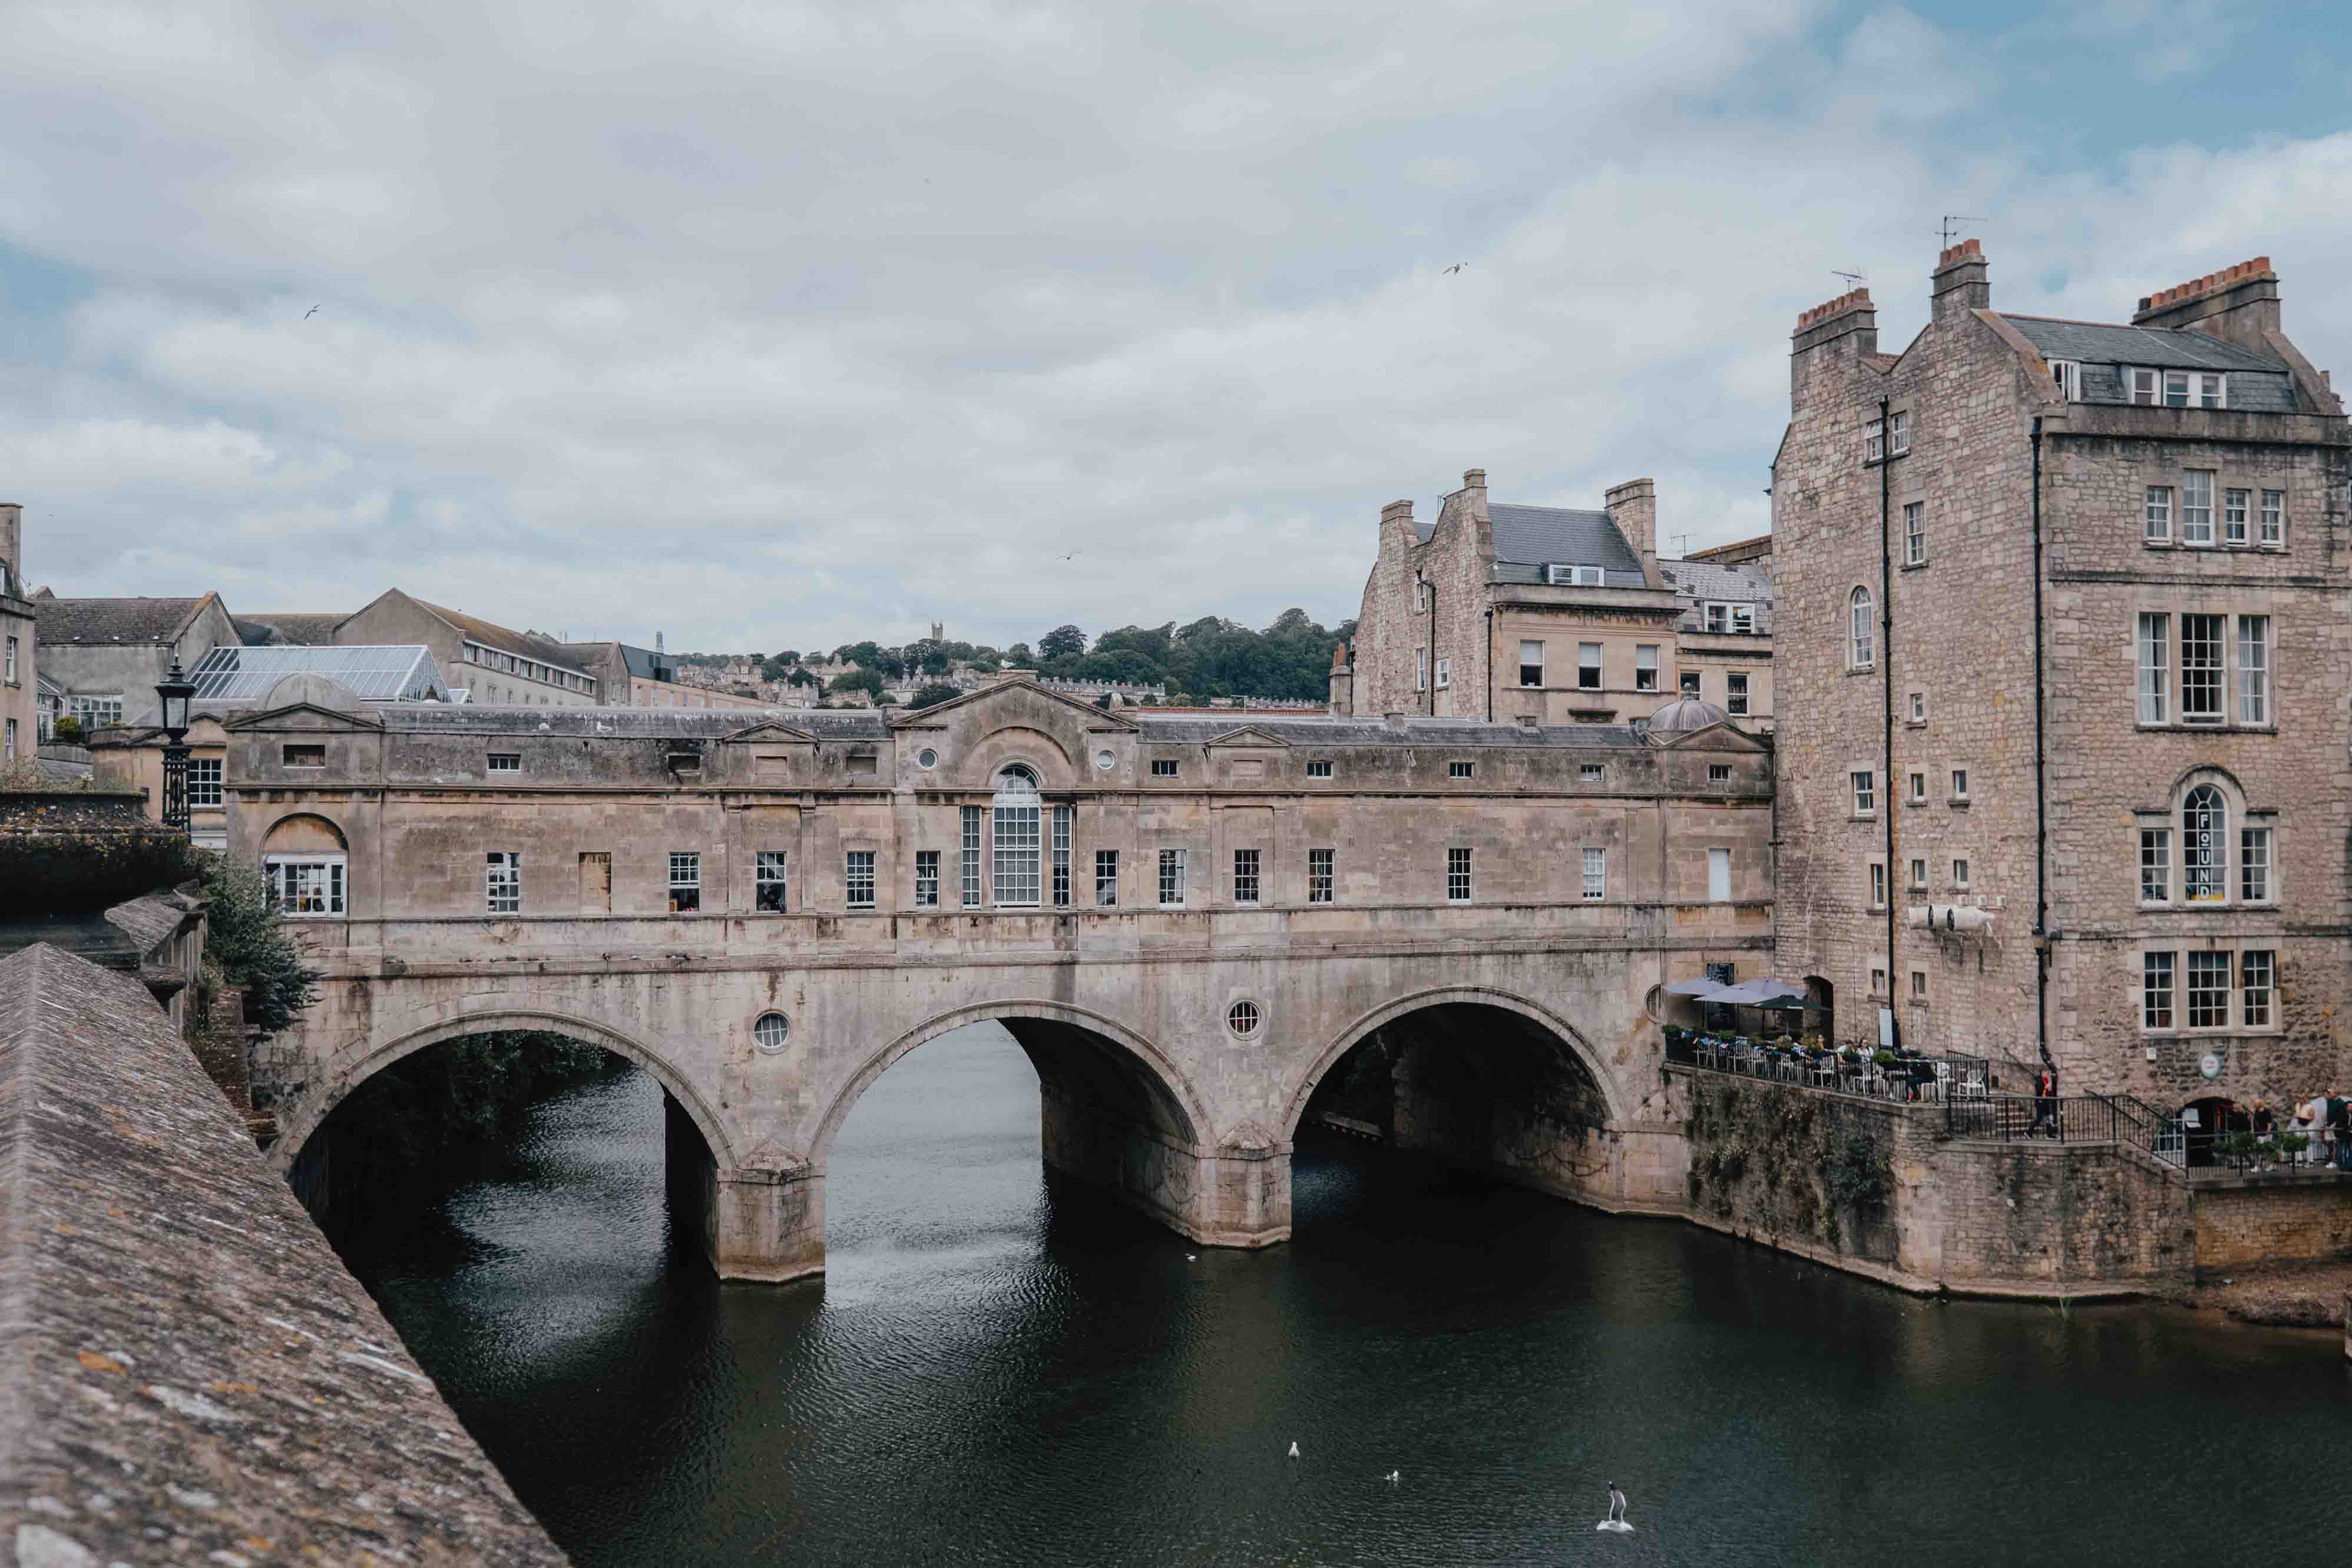 A heritage bridge spanning a river in the historic city of Bath